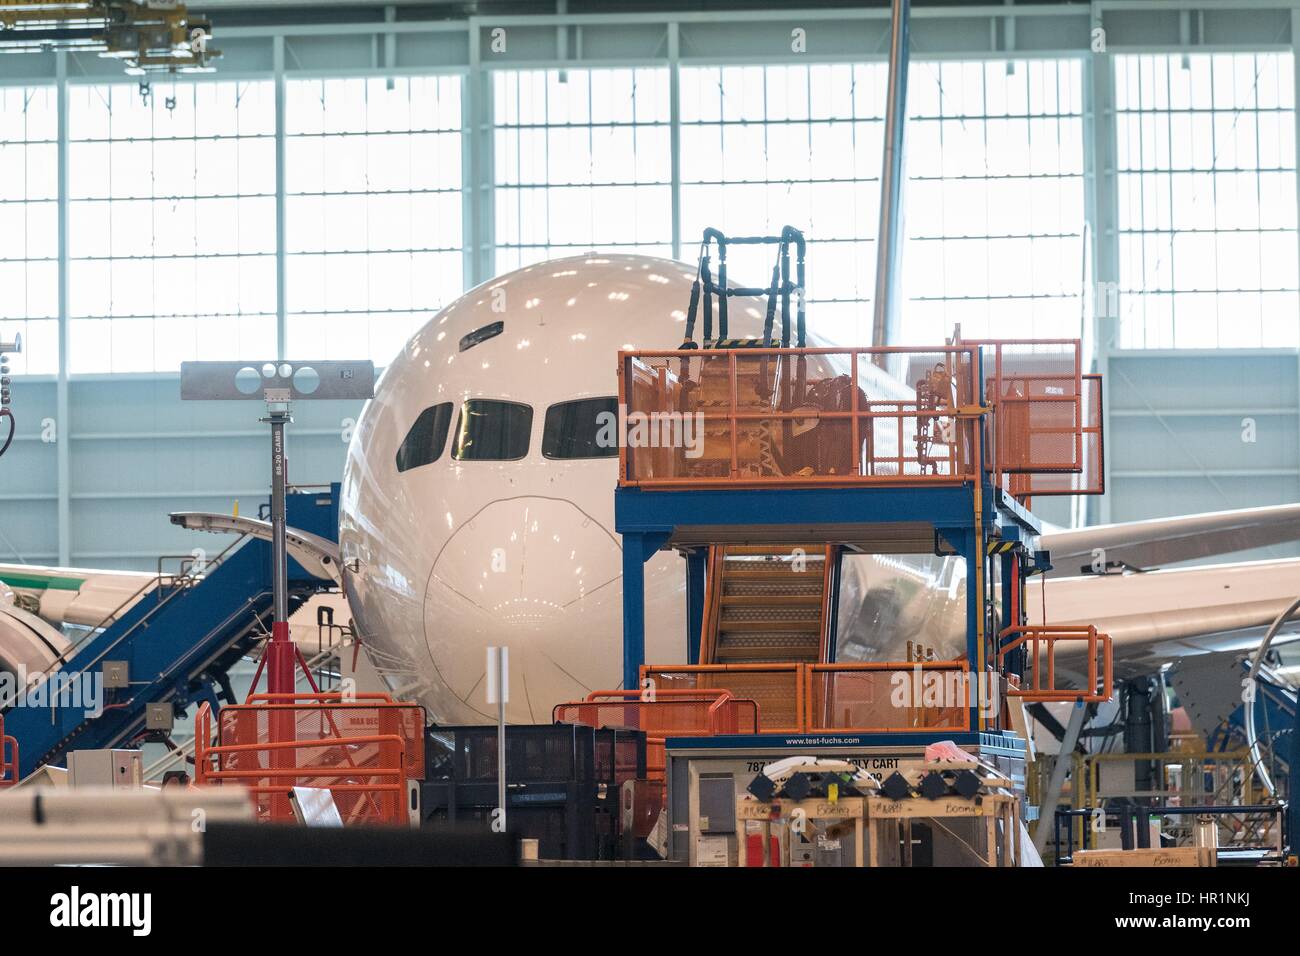 Manufacturing production line for the new Boeing 787-10 Dreamliner aircraft unveiled at the Boeing factory February 17, 2016 in North Charleston, SC. President Donald Trump attended the rollout ceremony for the stretch version of the aircraft capable of carrying 330 passengers over 7,000 nautical miles. Stock Photo